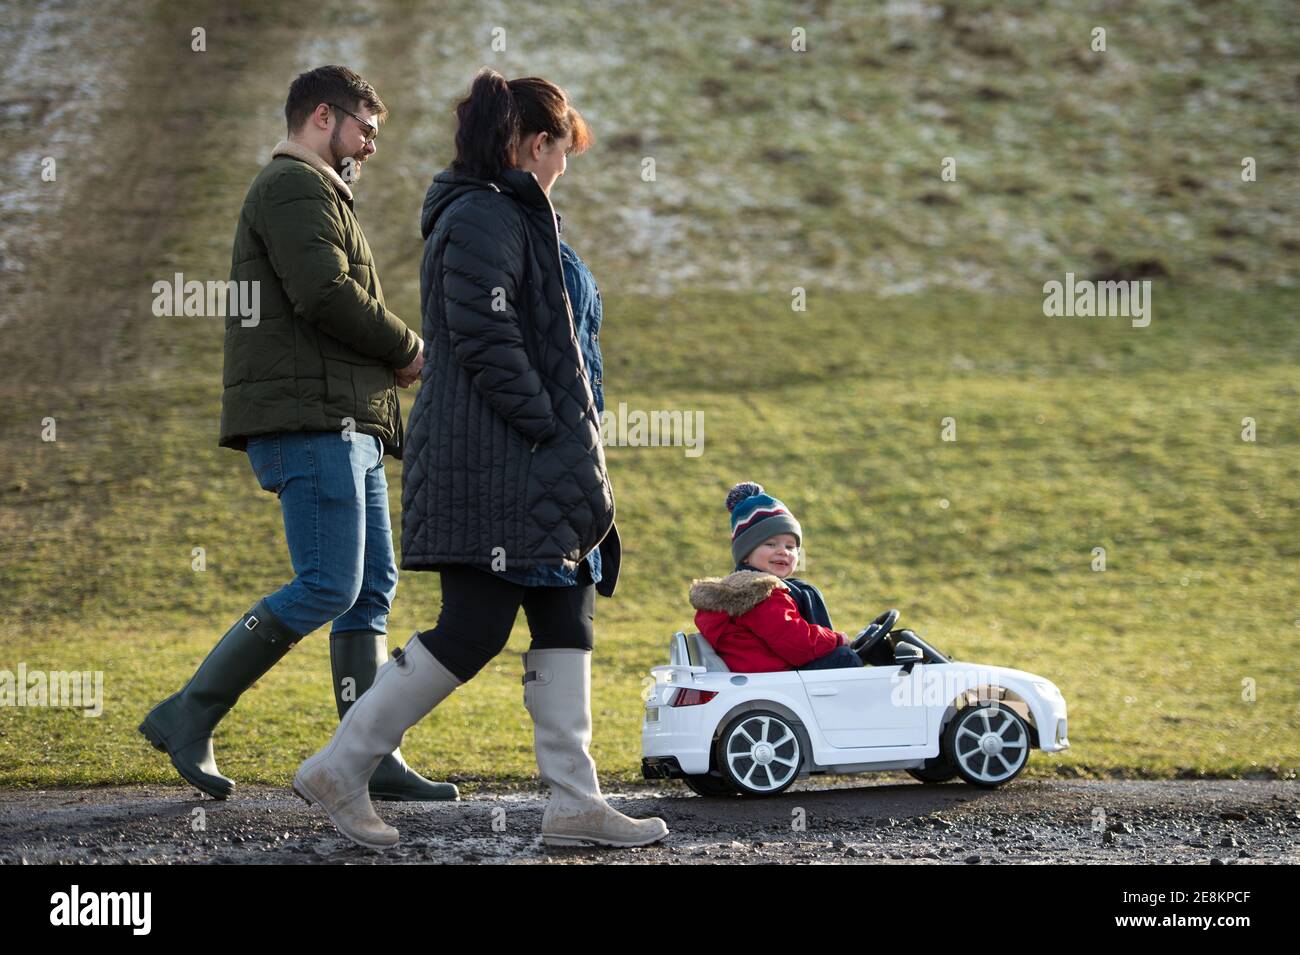 Hamilton, Scotland, UK. 31st Jan, 2021. Pictured: A young family seen walking as their kid takes in the sites from his toy convertible Audi car in the park. People out in Chatelherault Country Park taking in exercise as the temperature stays just above freezing. The sun is out and people are enjoying themselves during the coronavirus phase 4 lockdown. Credit: Colin Fisher/Alamy Live News Stock Photo